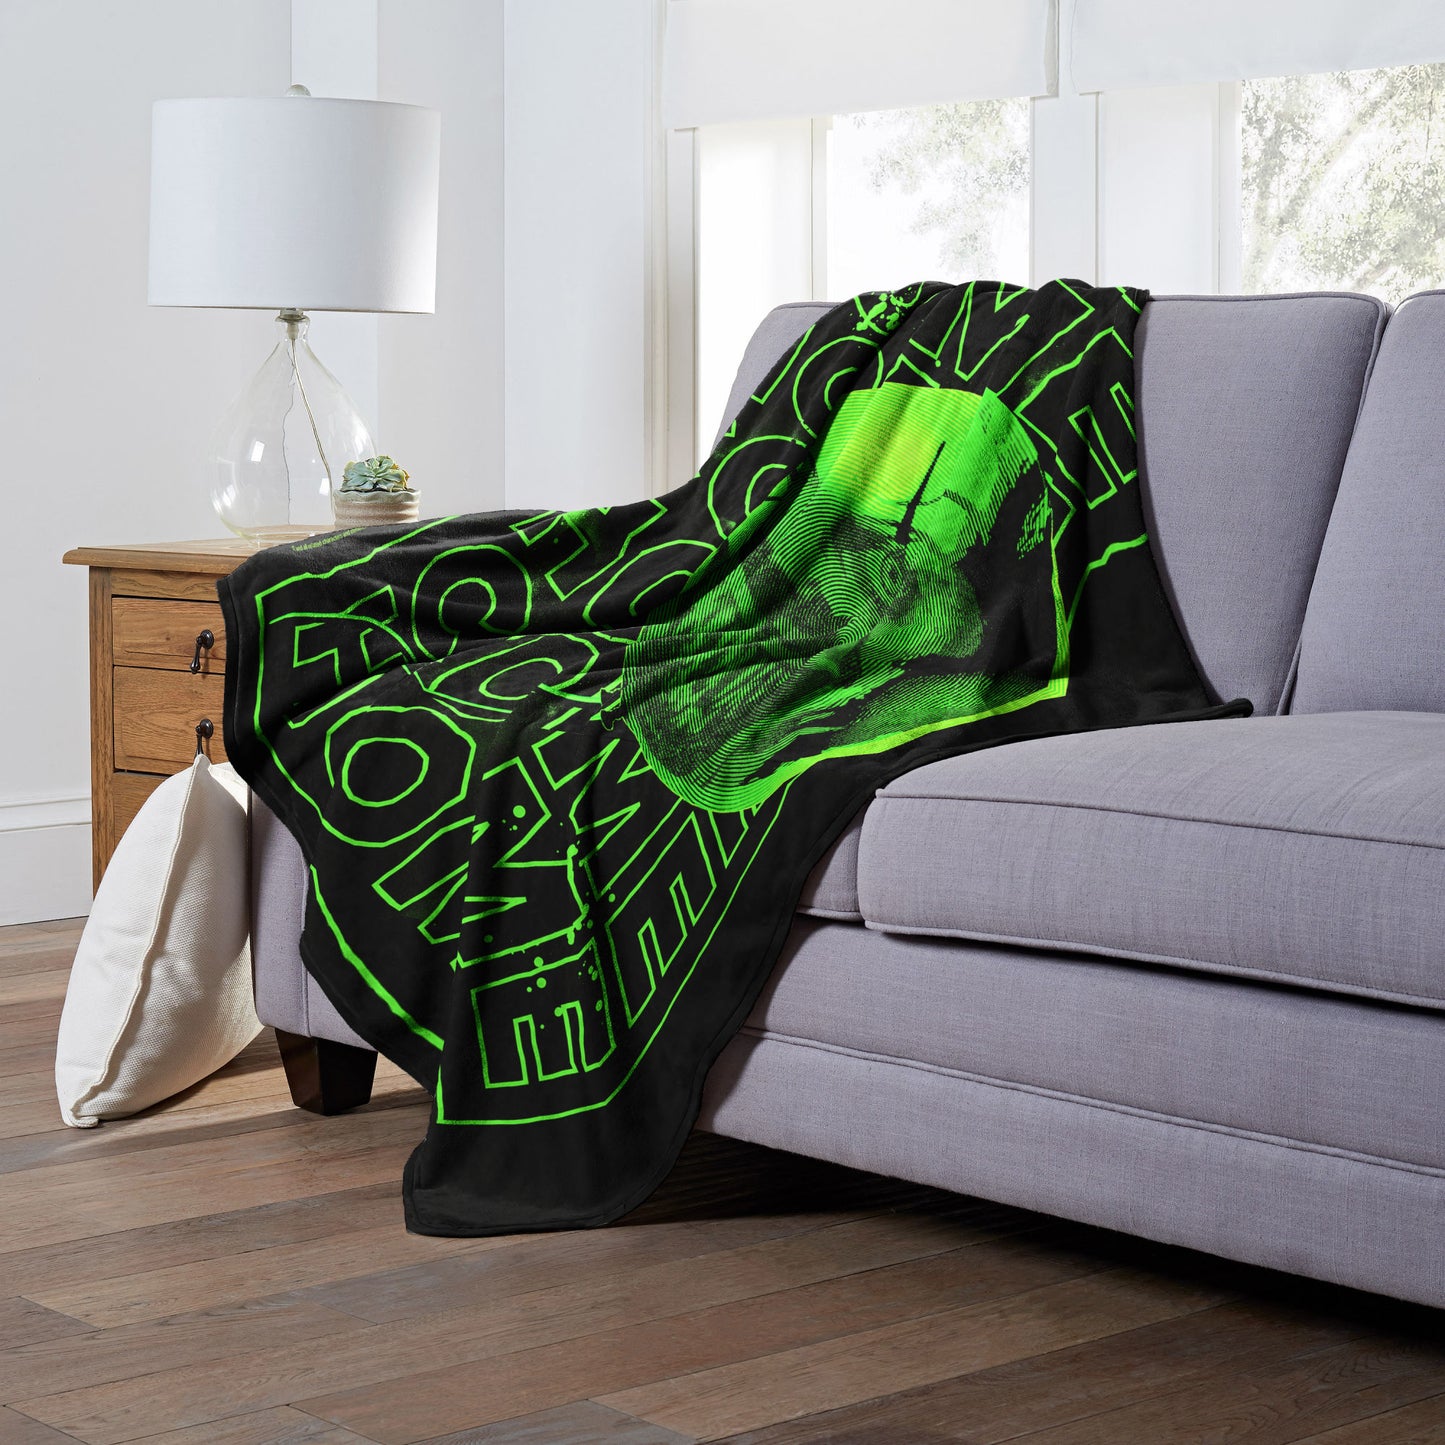 IT 2 Come Home Neon Green Throw Blanket 50"x60"